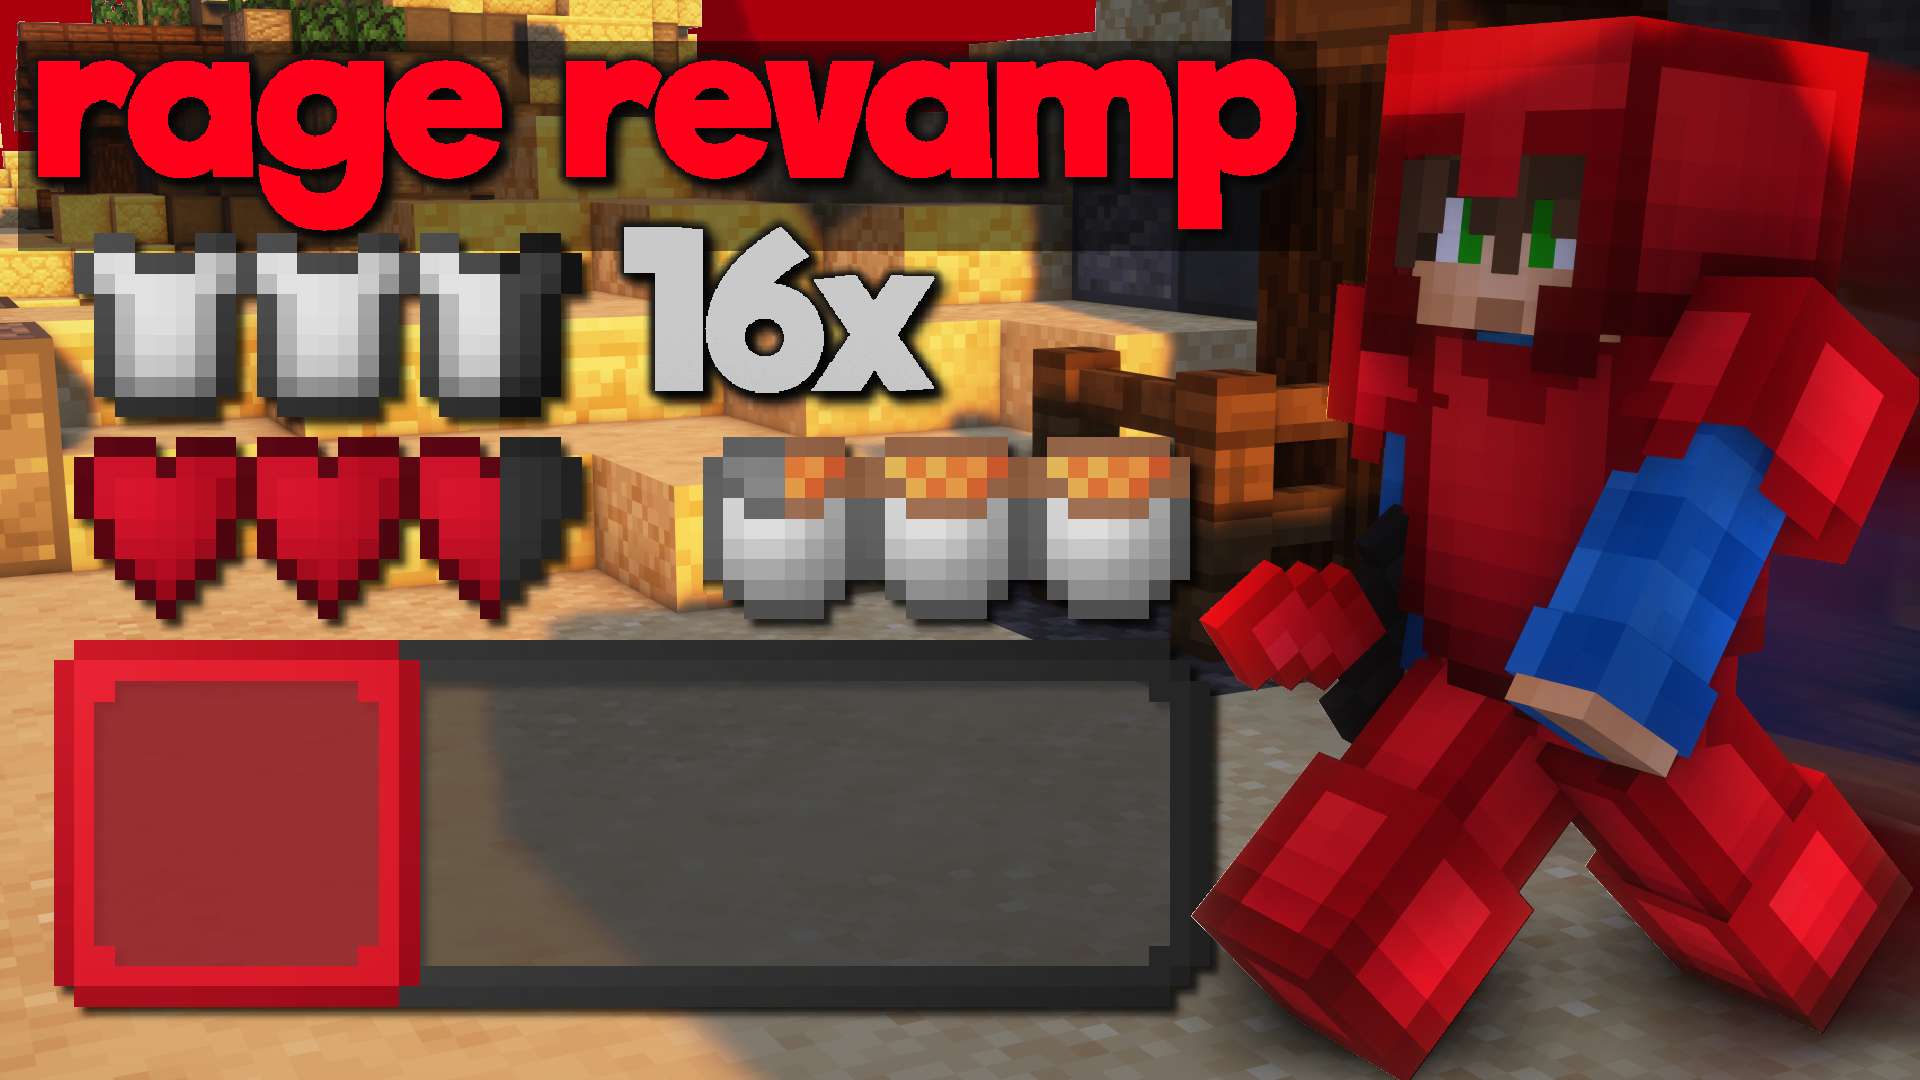 Rage Revamp 16x by supernovelchips on PvPRP